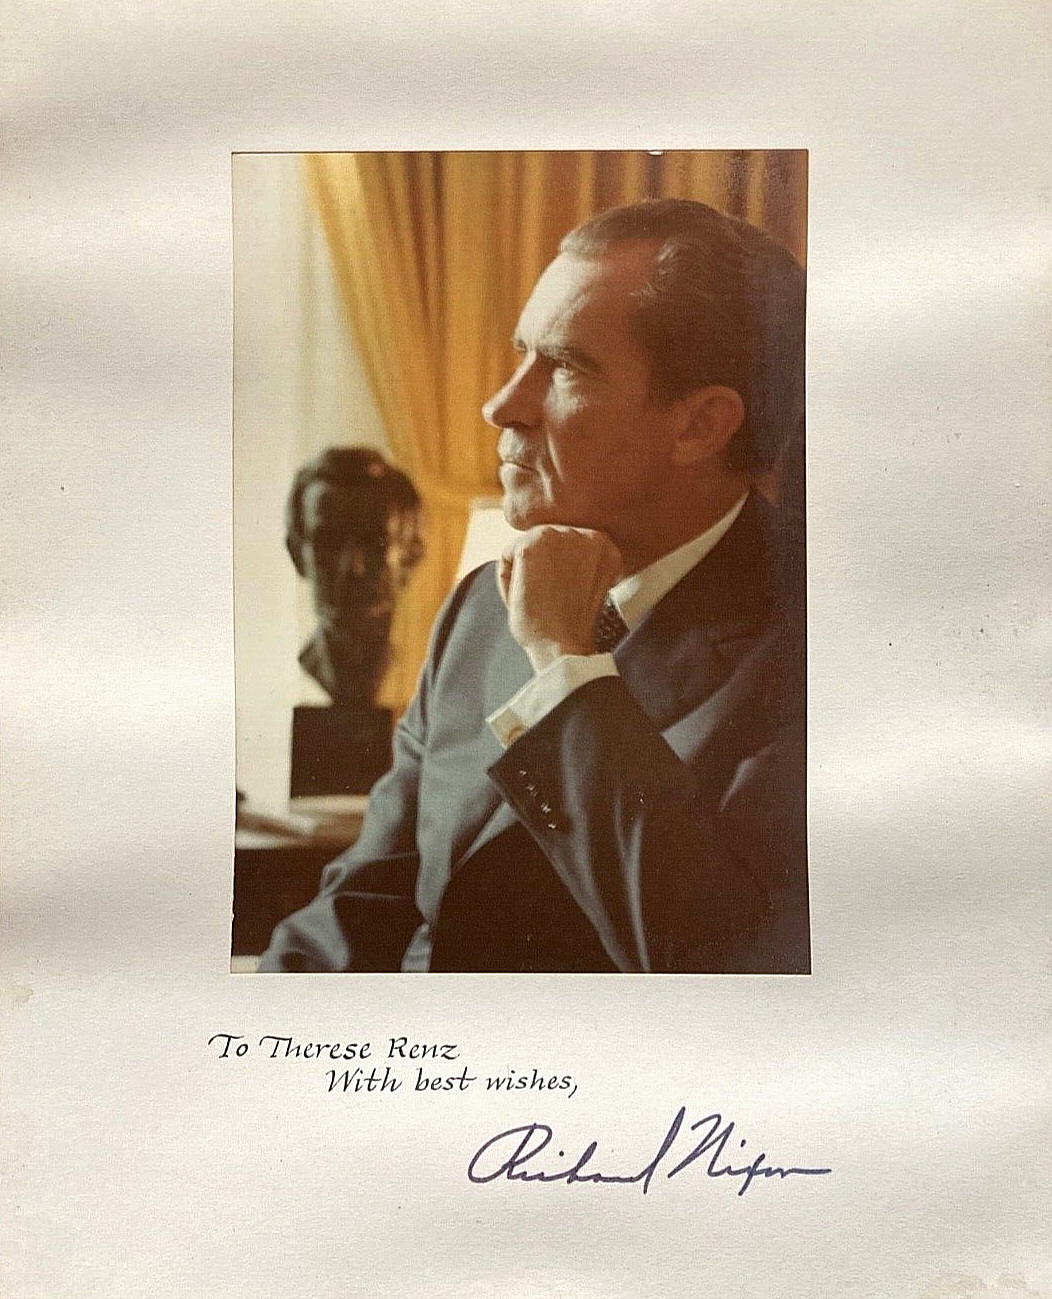 OFFICIAL WHITE HOUSE SERIAL NUMBERED DATED PRES. RICHARD NIXON AUTOGRAPHED PHOTO